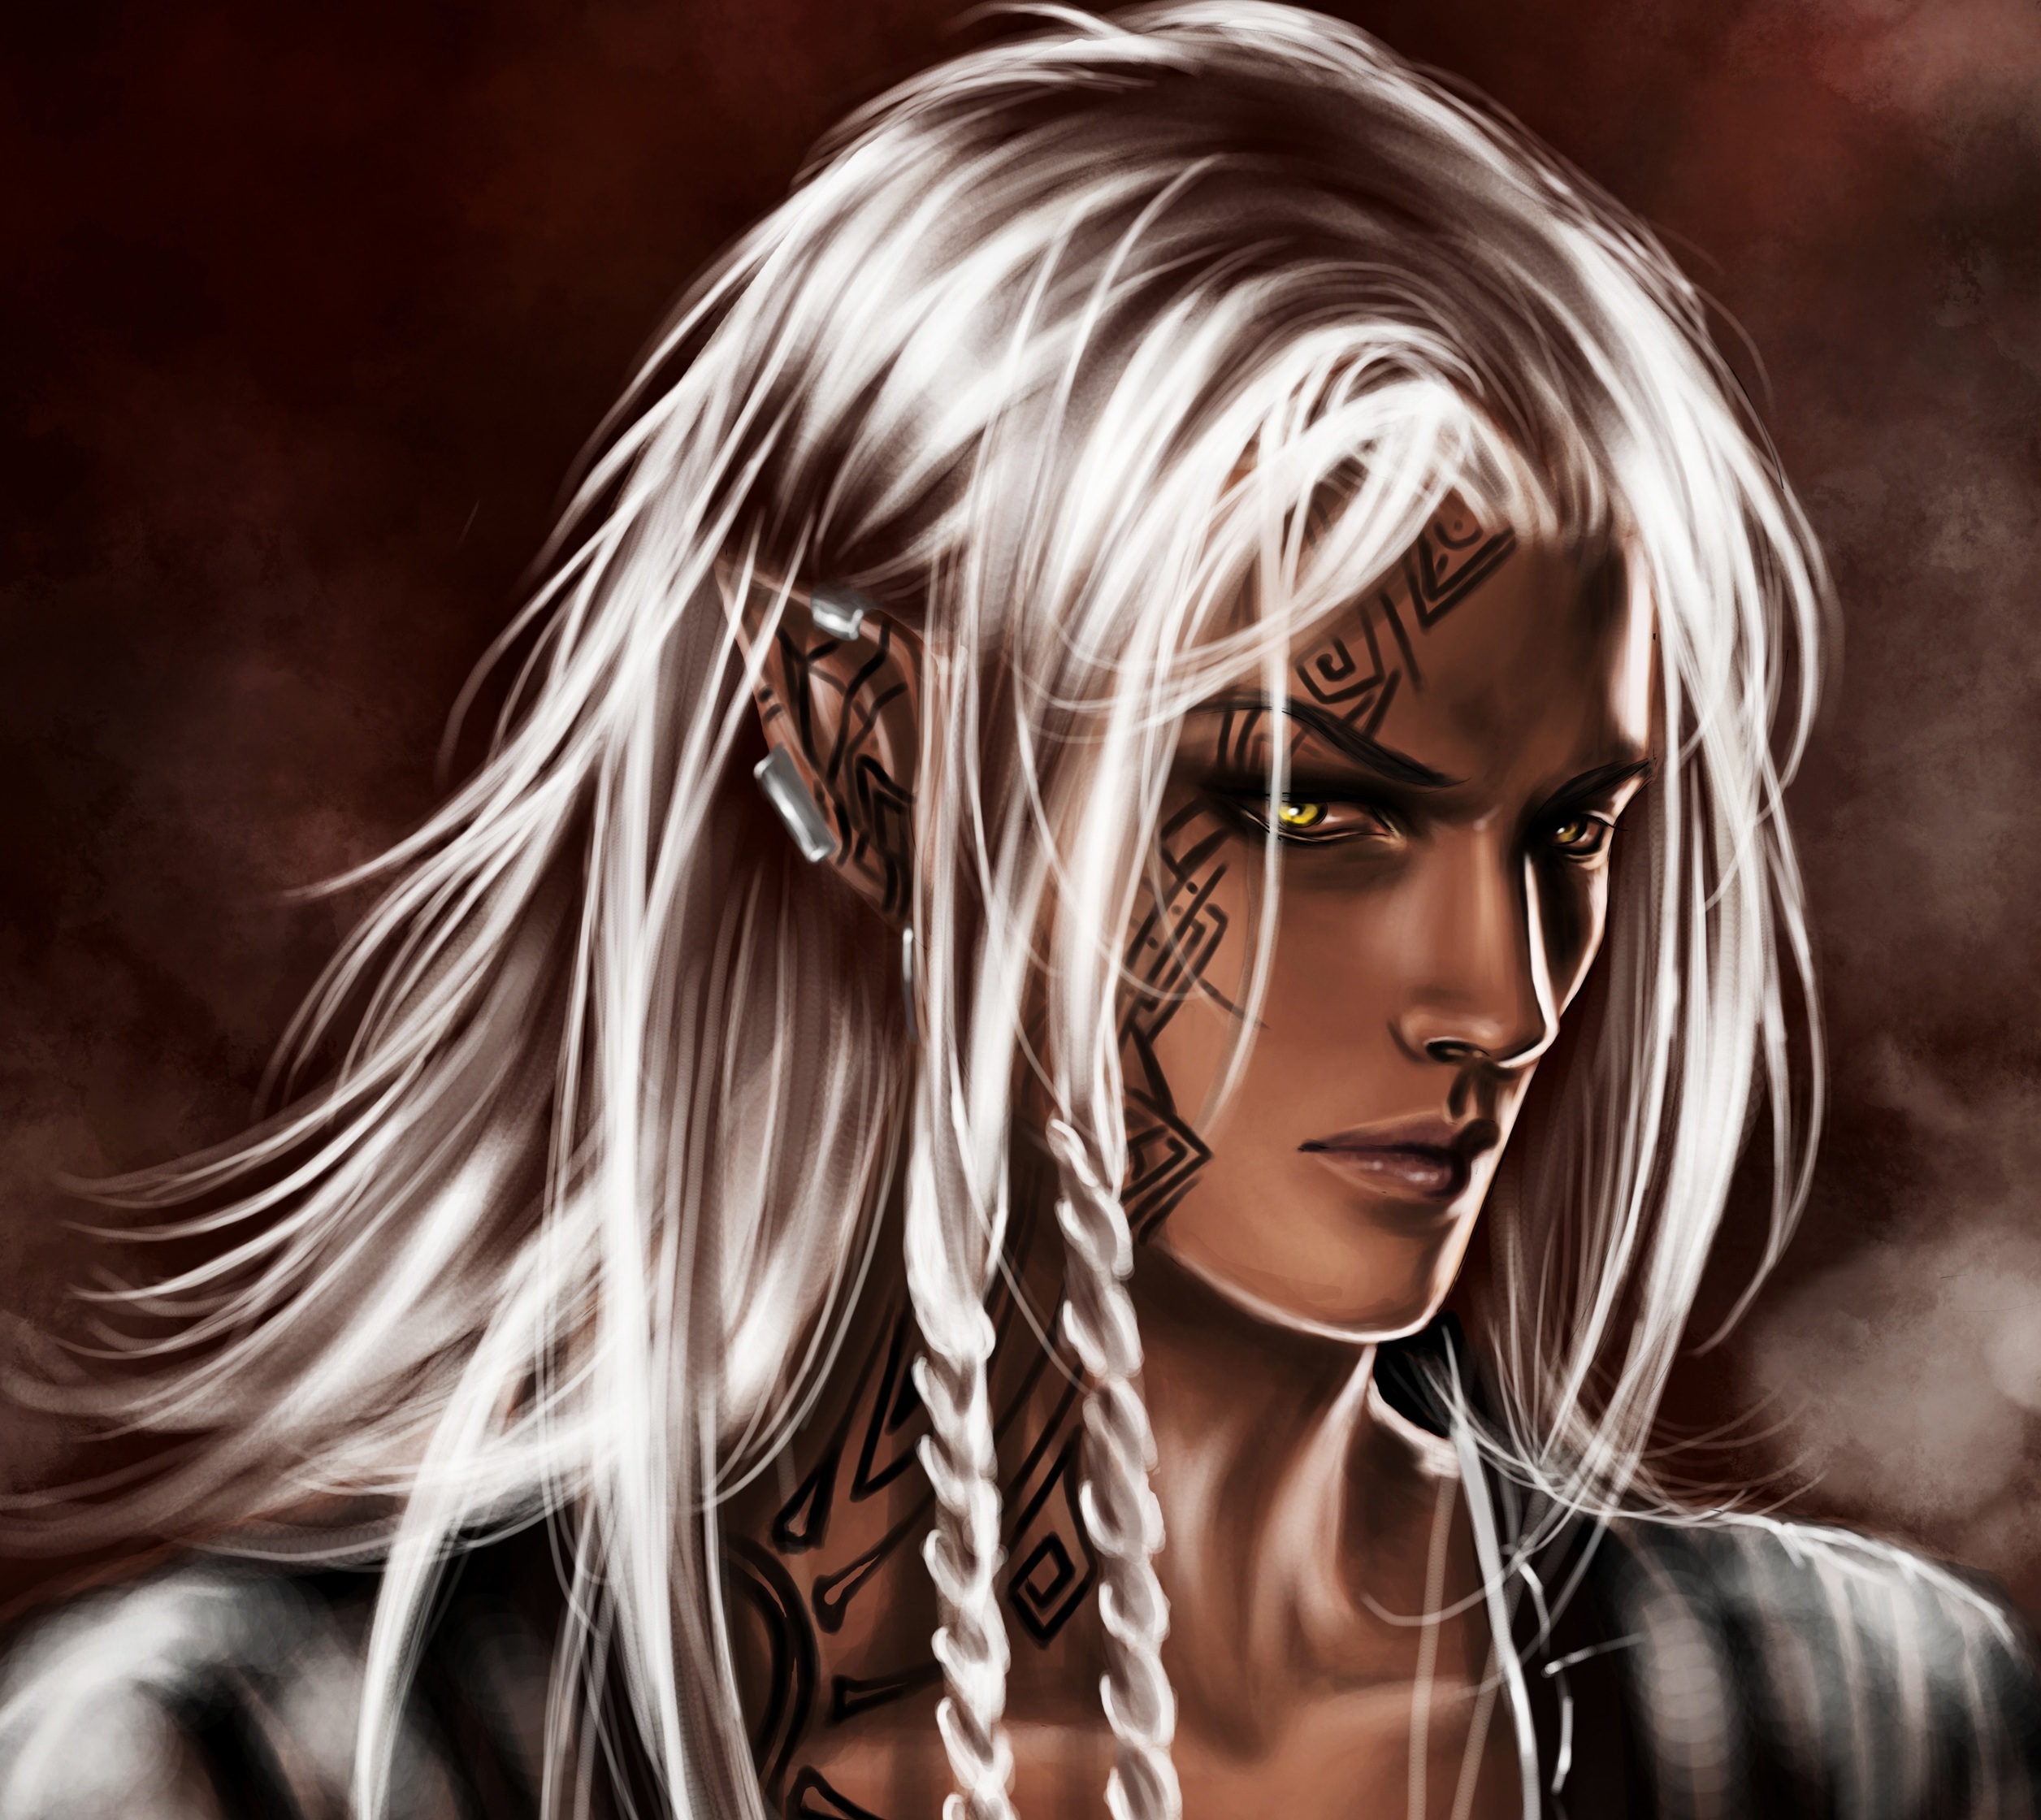 Download Pointed Ears Face Tattoo White Hair Fantasy Elf Hd Wallpaper By Orenmiller